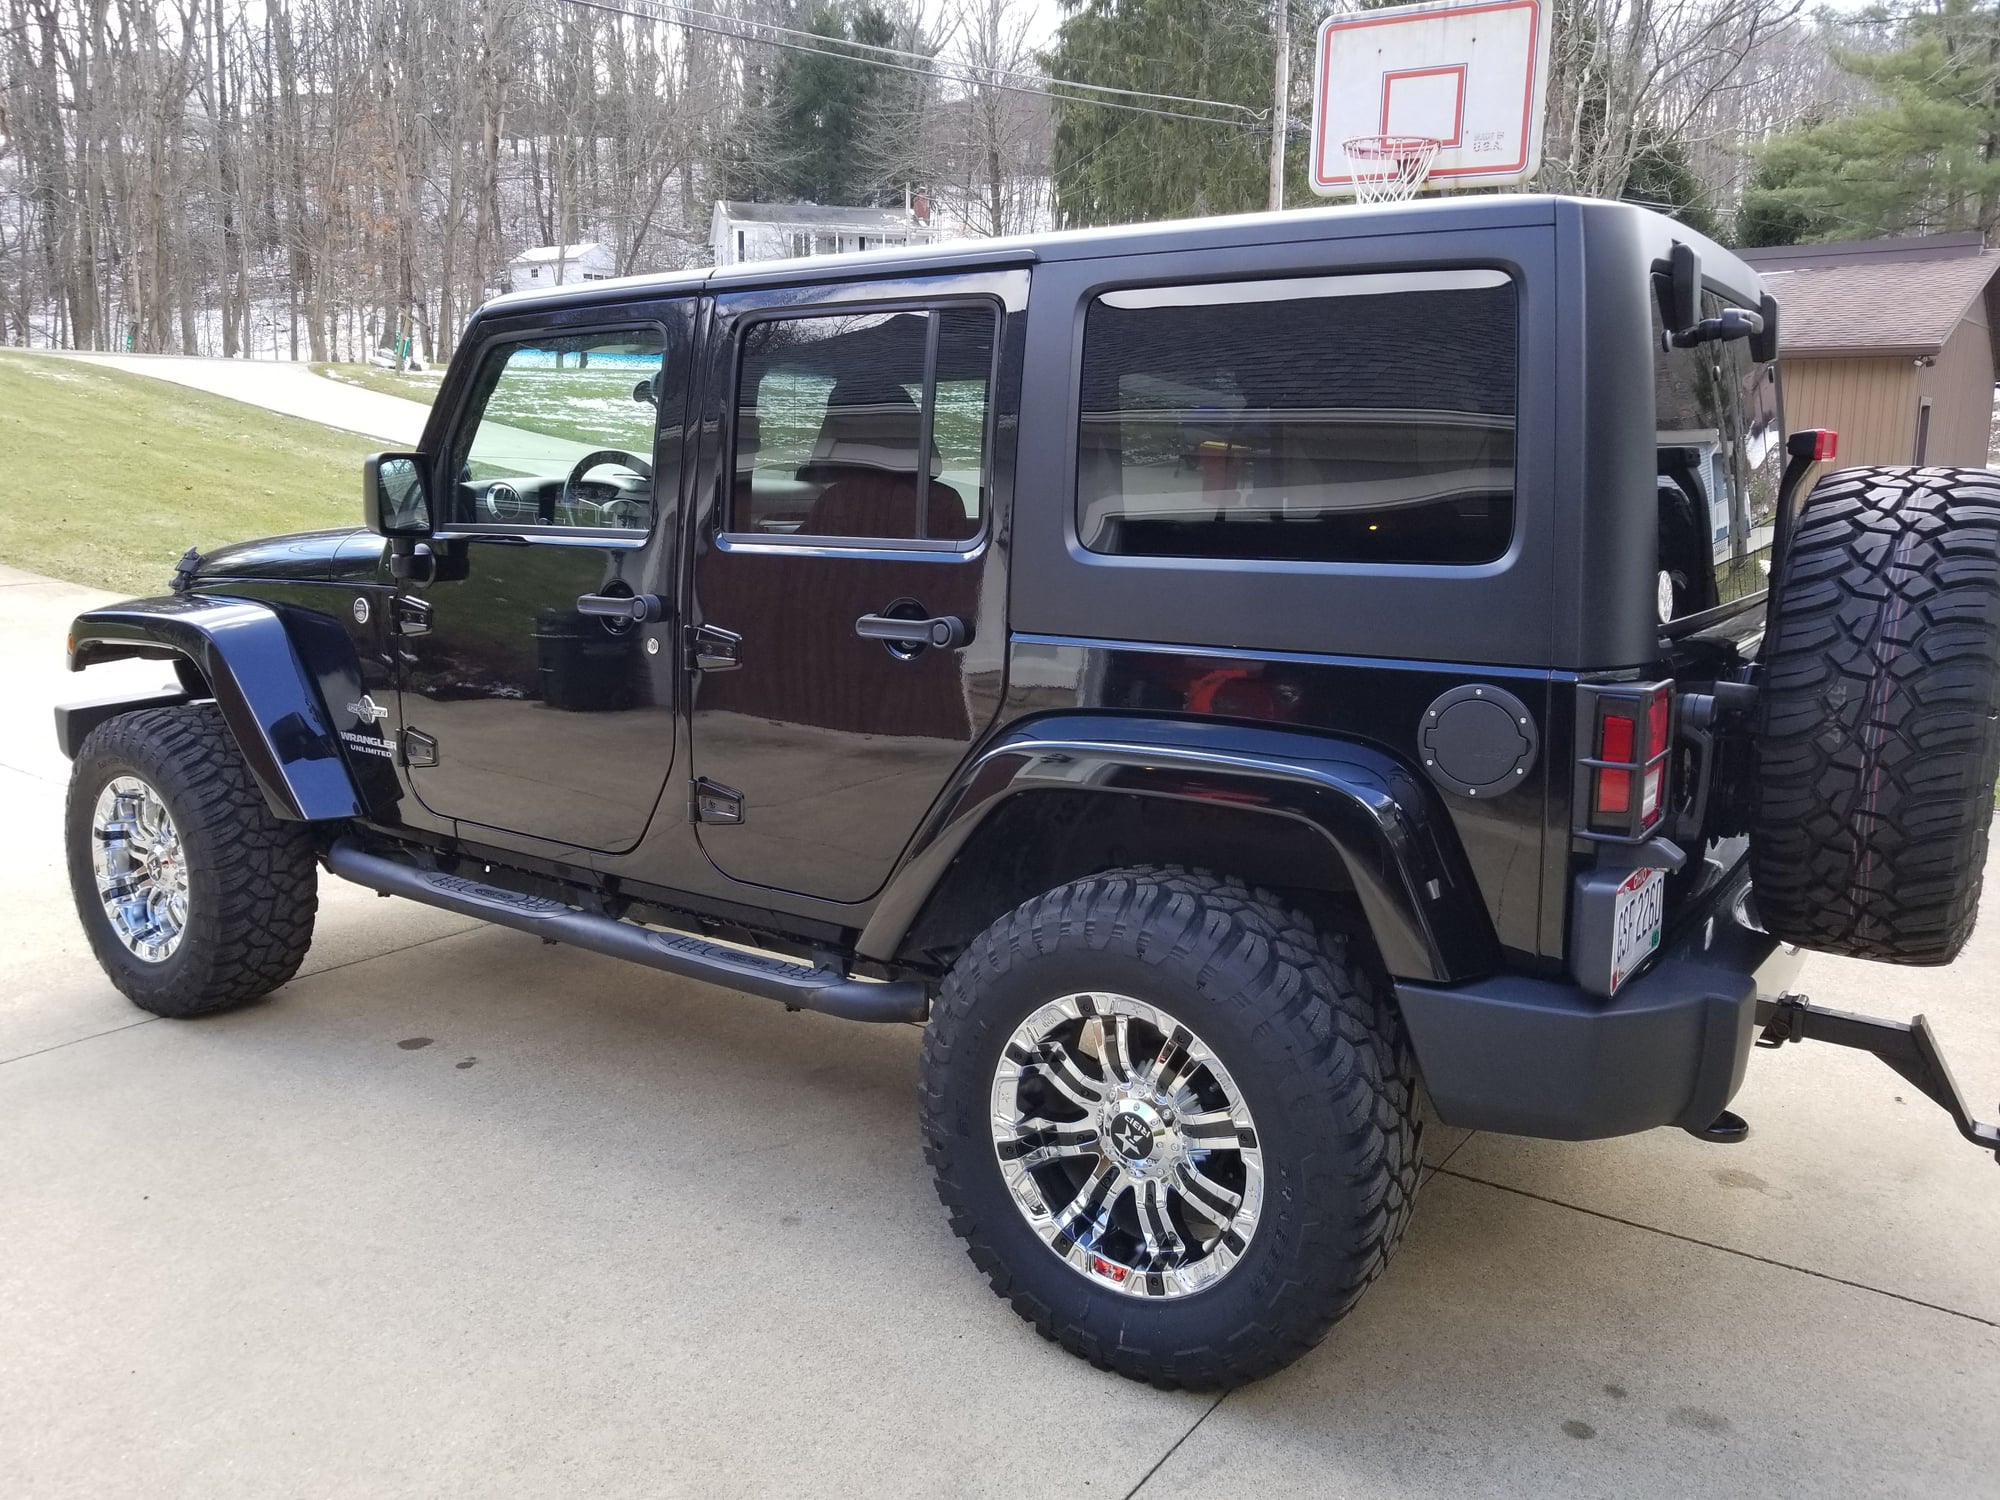 2014 Jeep Wrangler - 2014 Jeep Wrangler Unlimited Sport 4x4 Oscar Mike Edition - Used - VIN 1C4BJWDG7EL199554 - 65,000 Miles - 6 cyl - 4WD - Automatic - SUV - Black - Malvern, OH 44644, United States